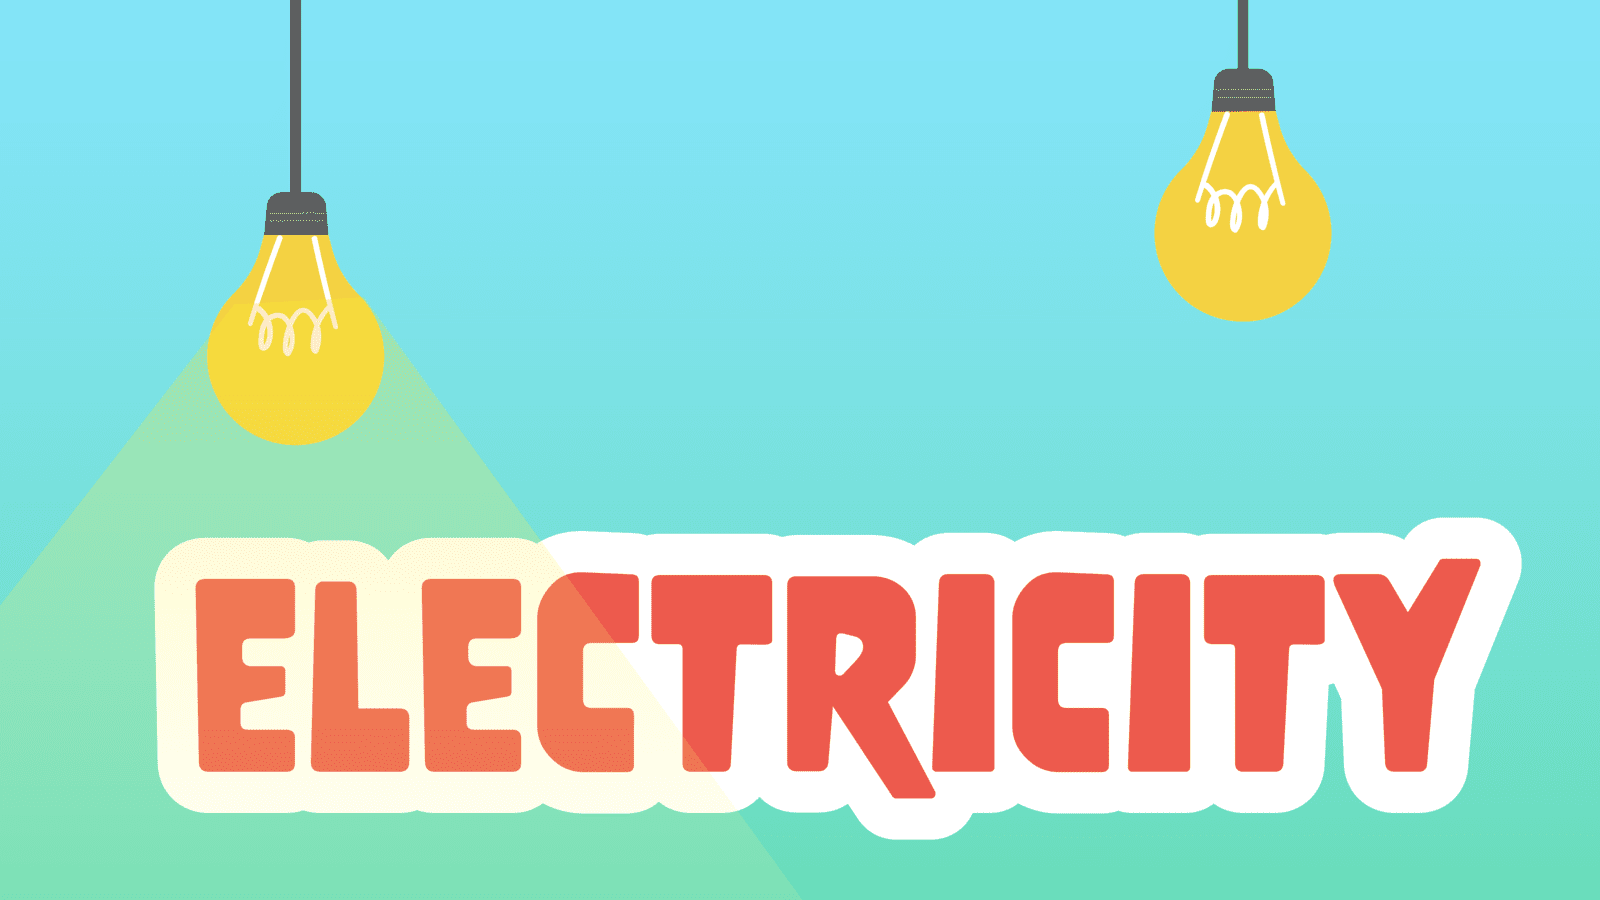 Electricity Facts for Kids – 5 Energetic Facts about Electricity